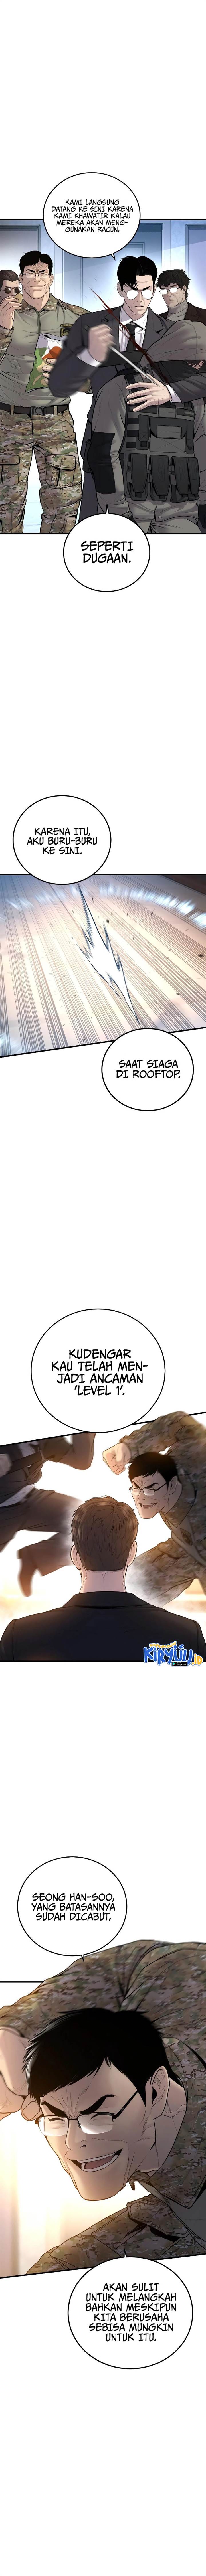 Manager Kim Chapter 95